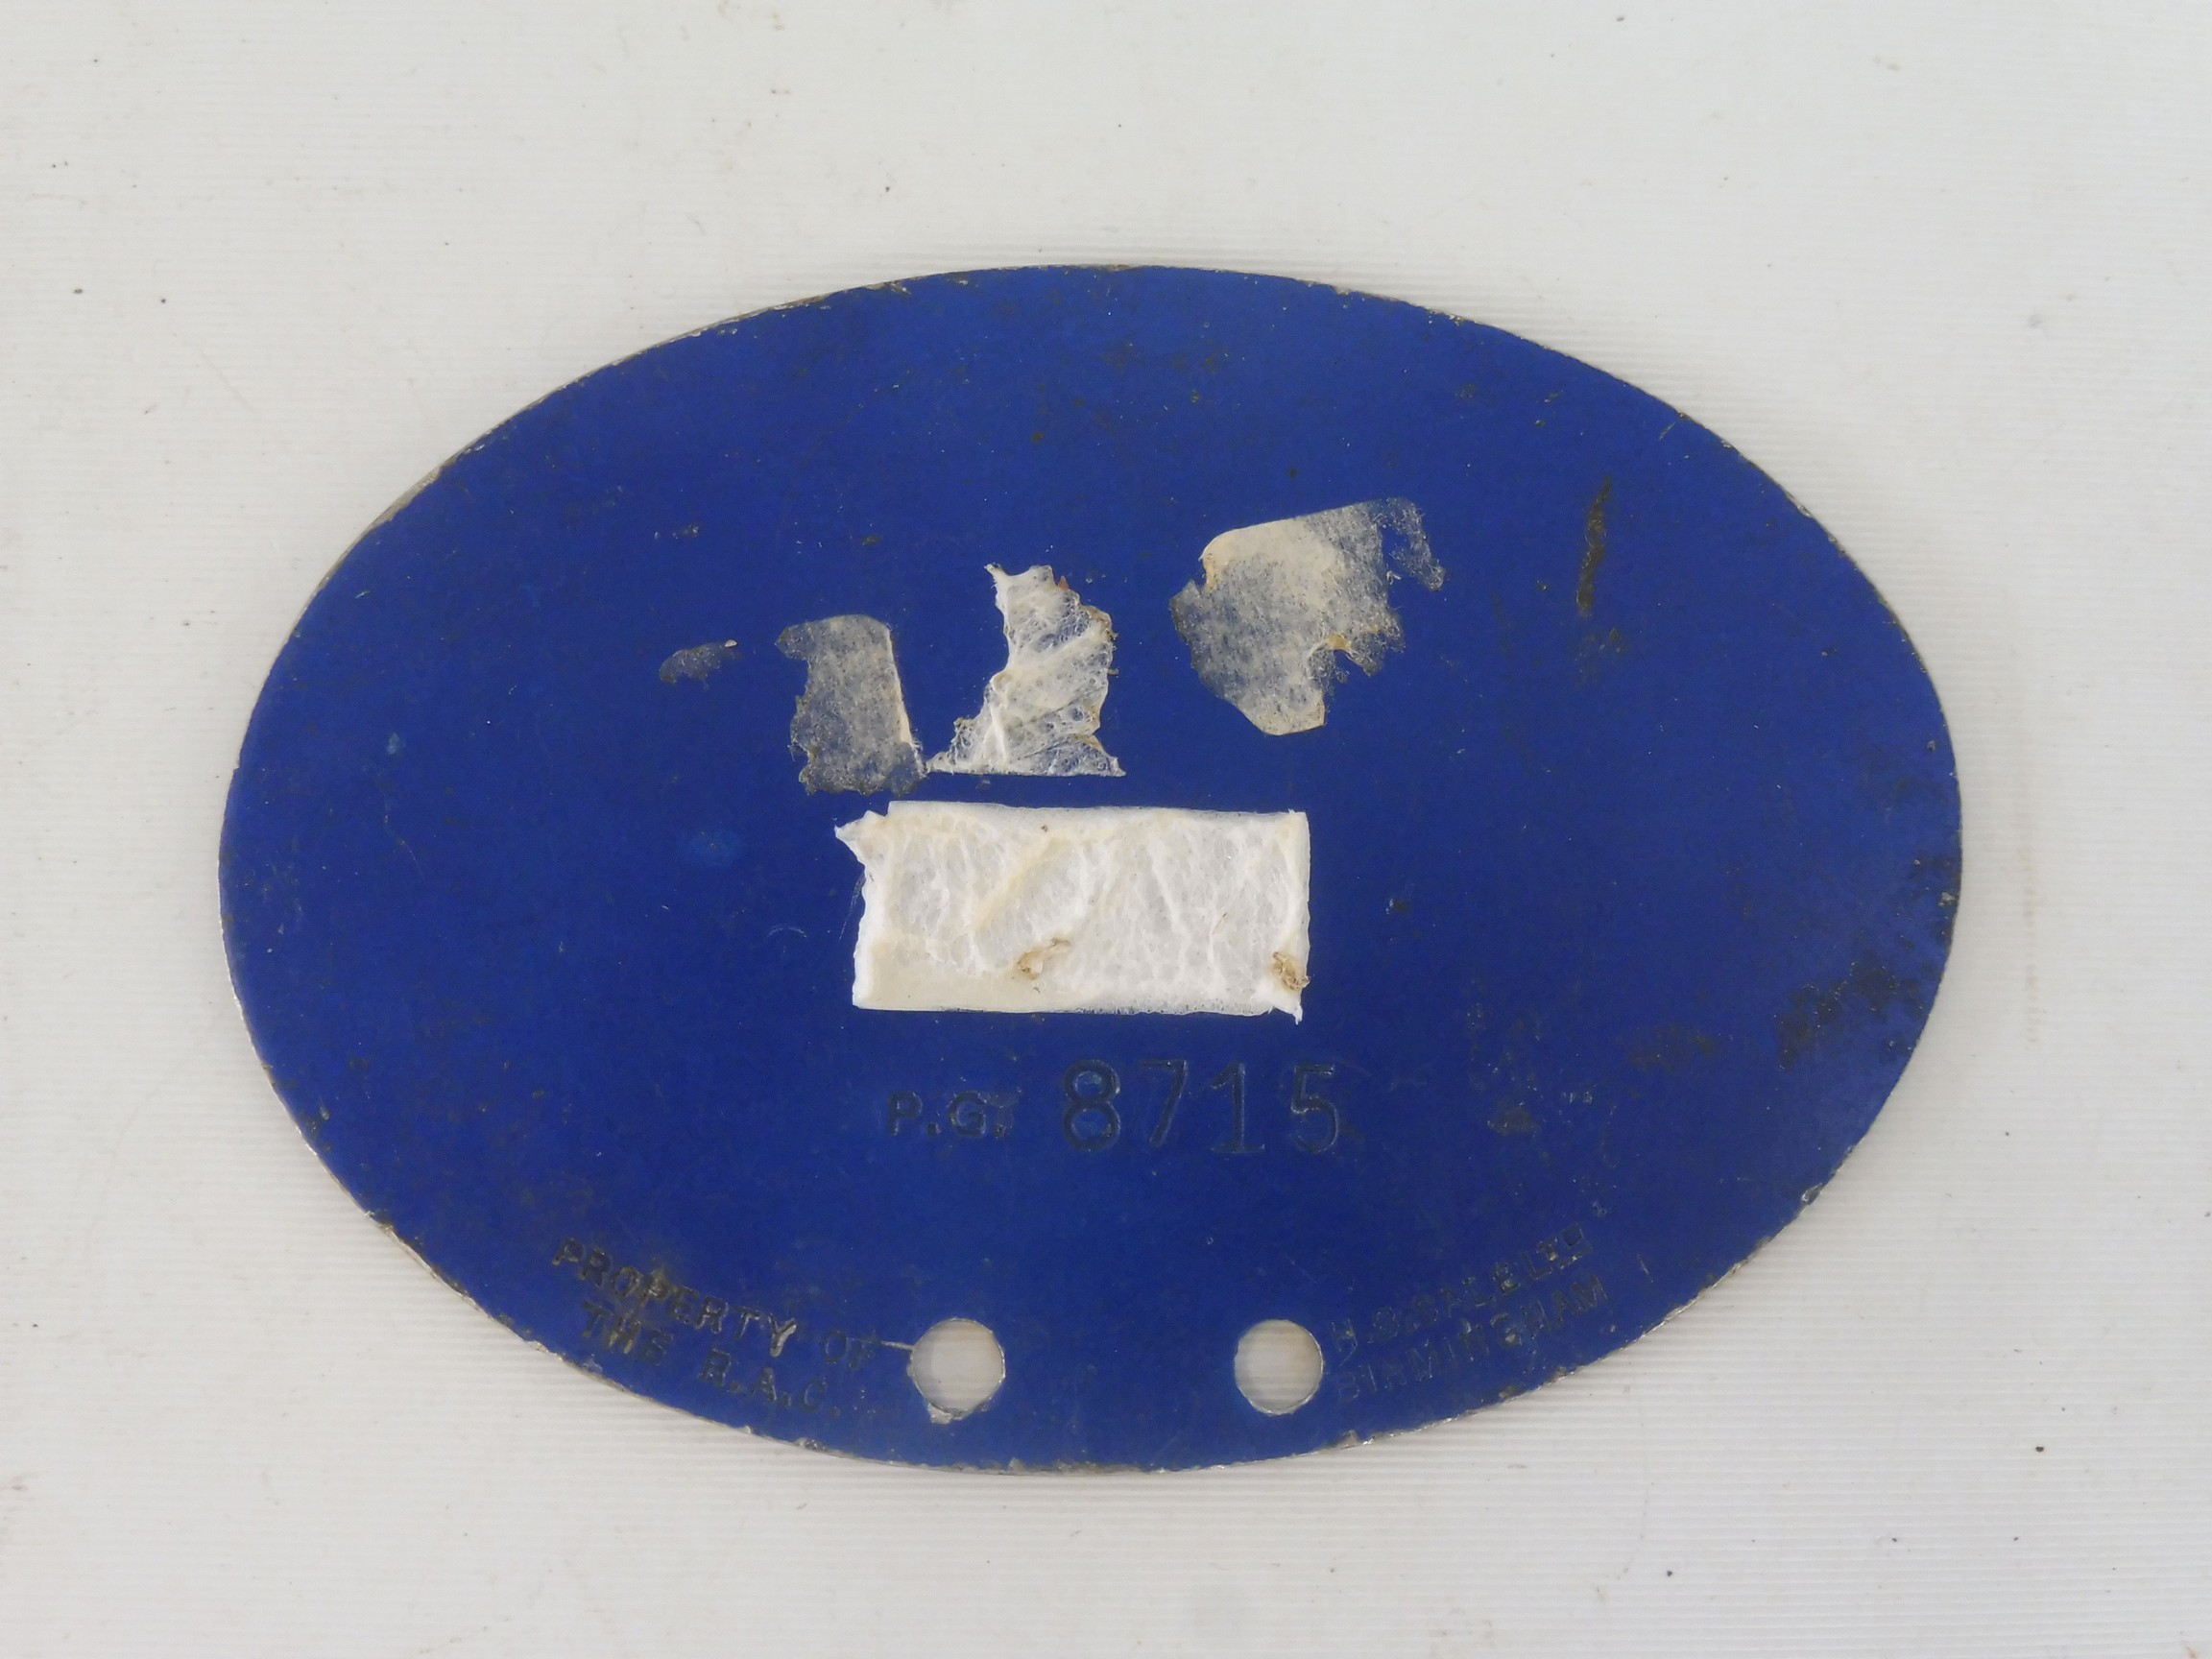 An RAC Private Goods Vehicle Section type 1 oval aluminium badge, 1949, rare as deemed flimsy and - Image 2 of 2